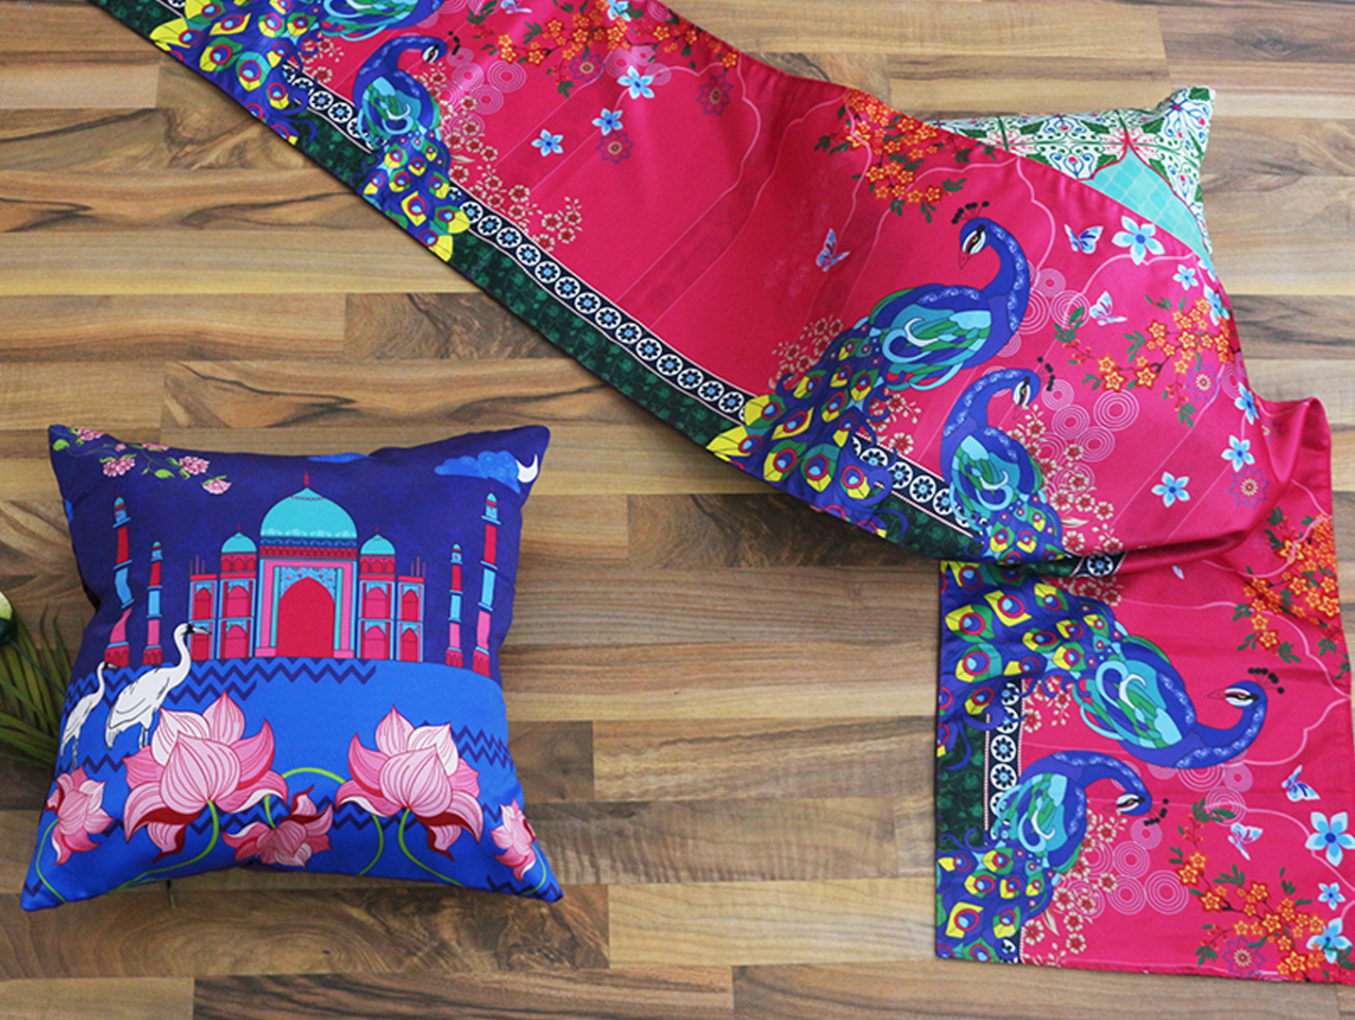 Holi Special: Lazing Around With Our Colourful Throws